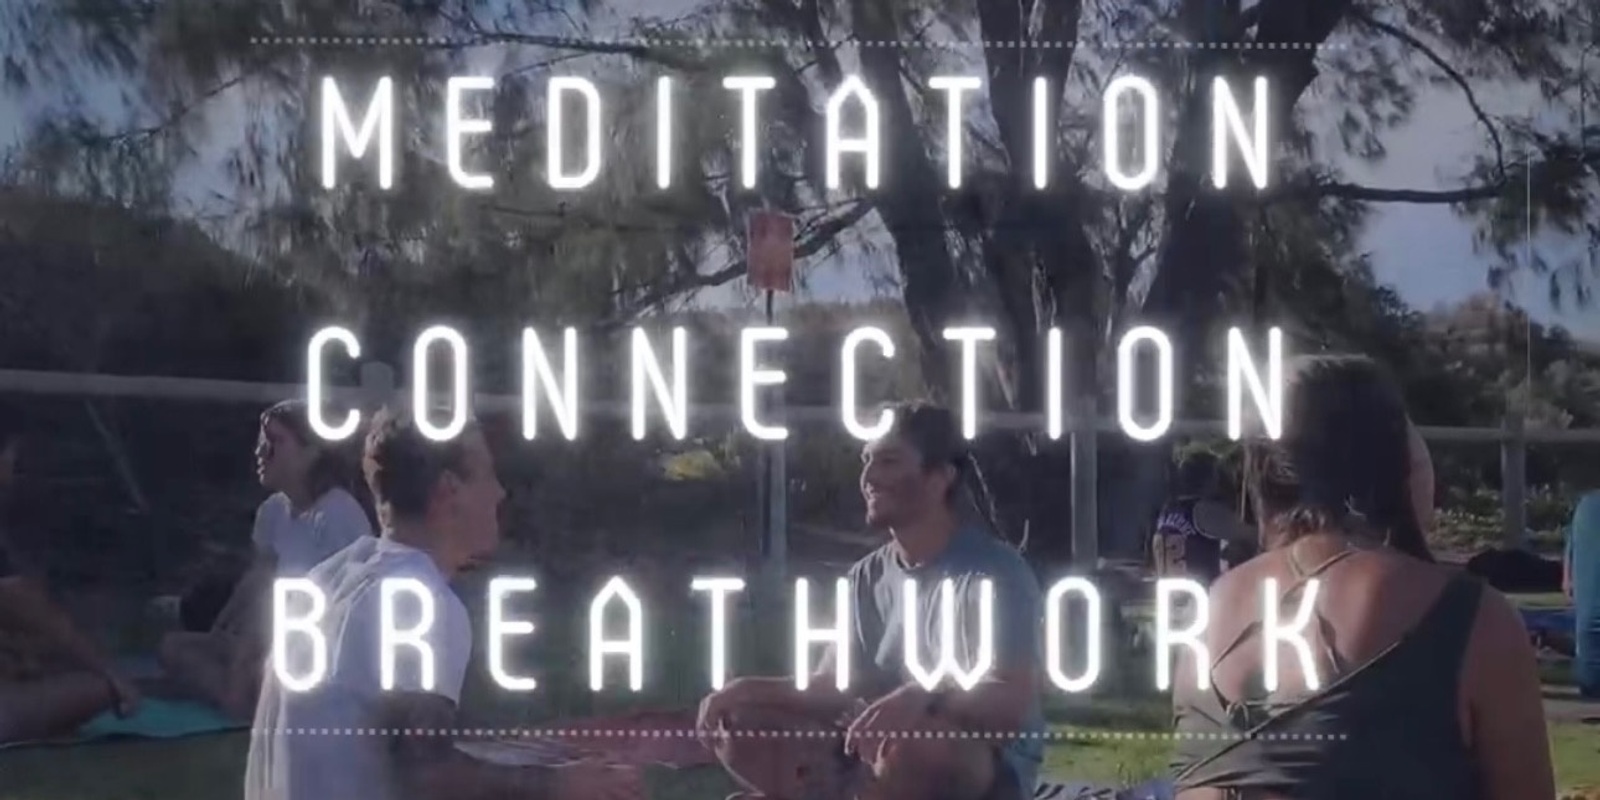 Banner image for Free Community Event • South Perth Foreshore •  Sun 7 Apr 8 to 9am • Meditation, Connection & Breathwork